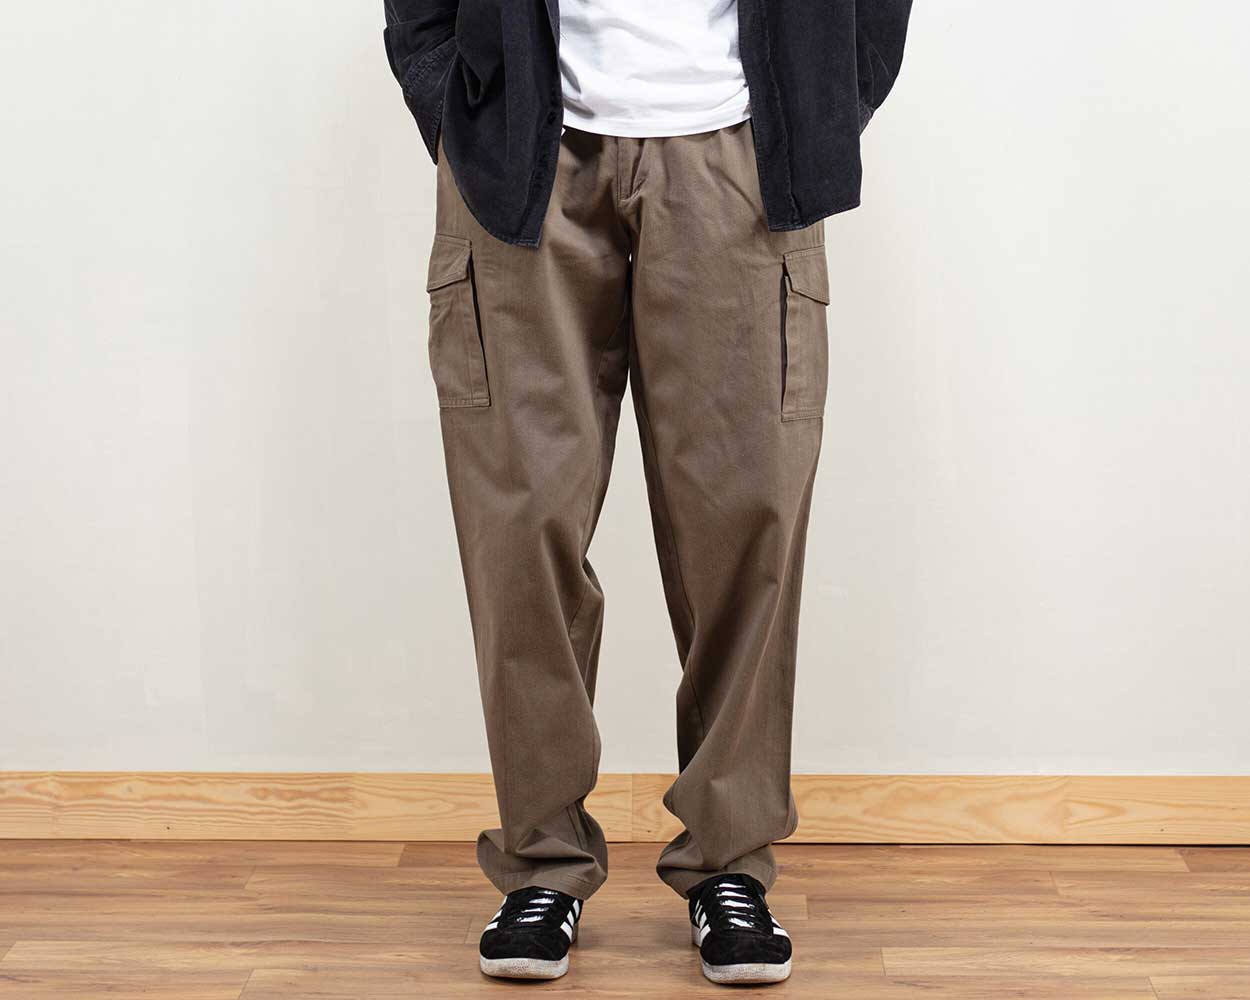 Cargo pants is a style that dates you to the 1990s